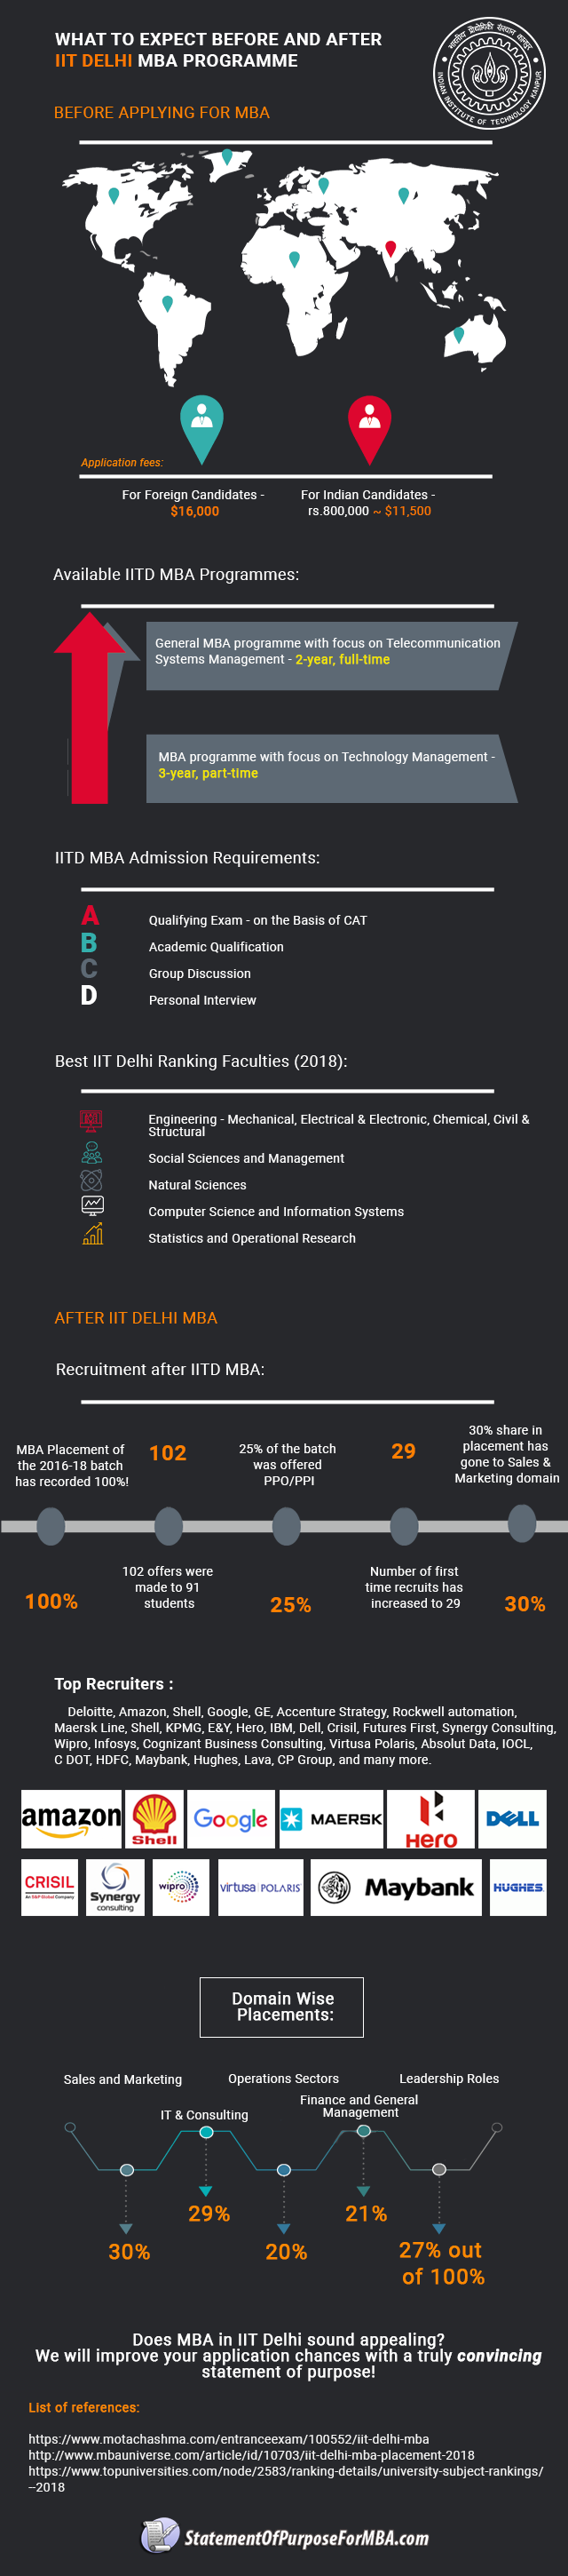 mba placement infographic